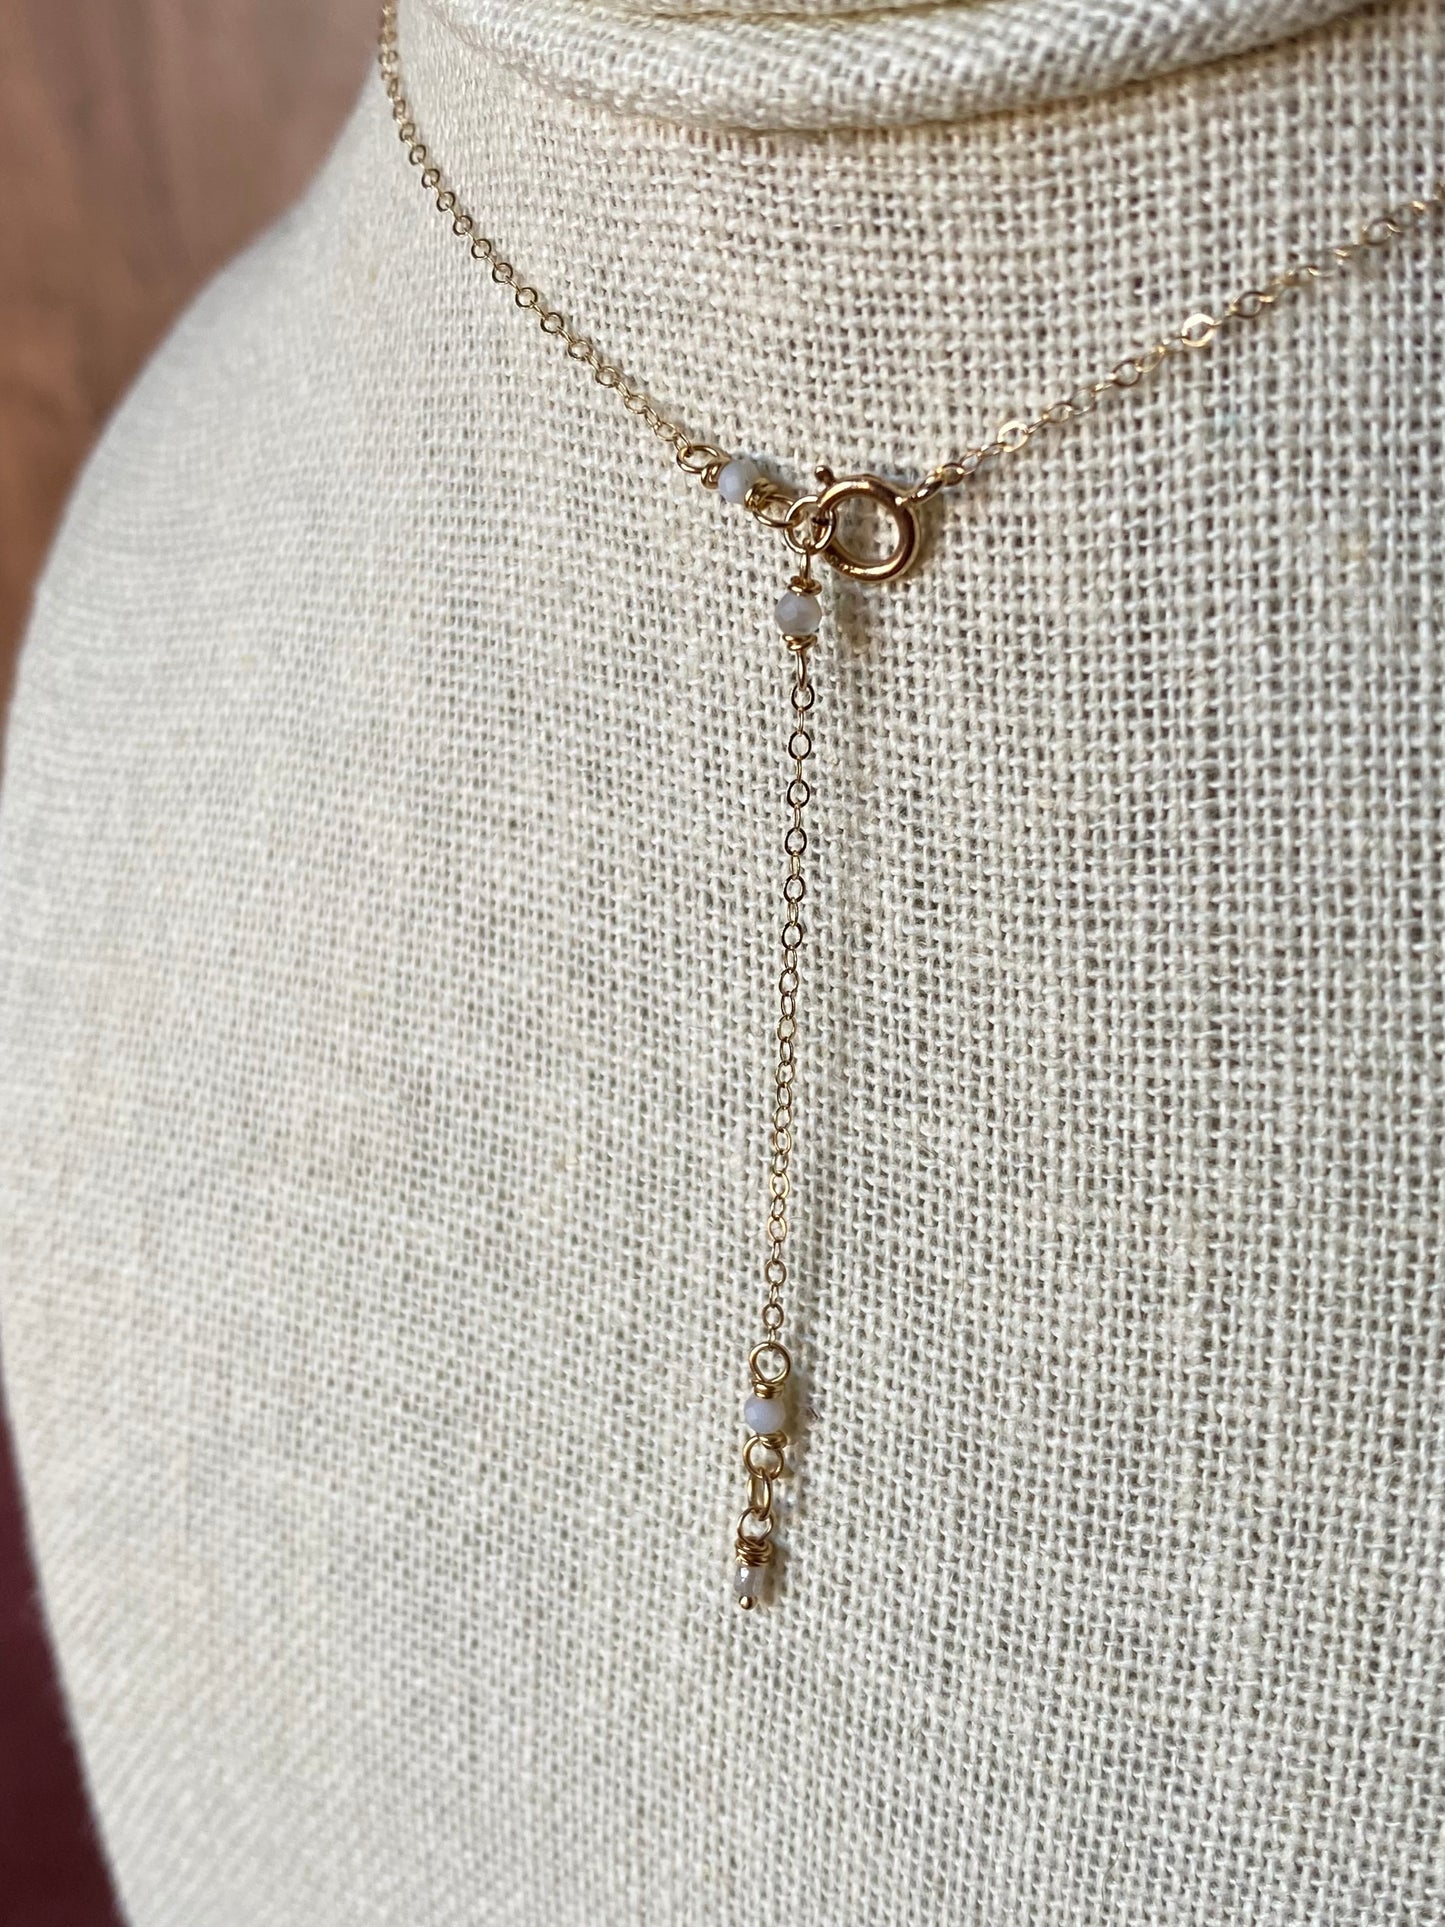 Kaiʻulani Necklace in Solid Gold